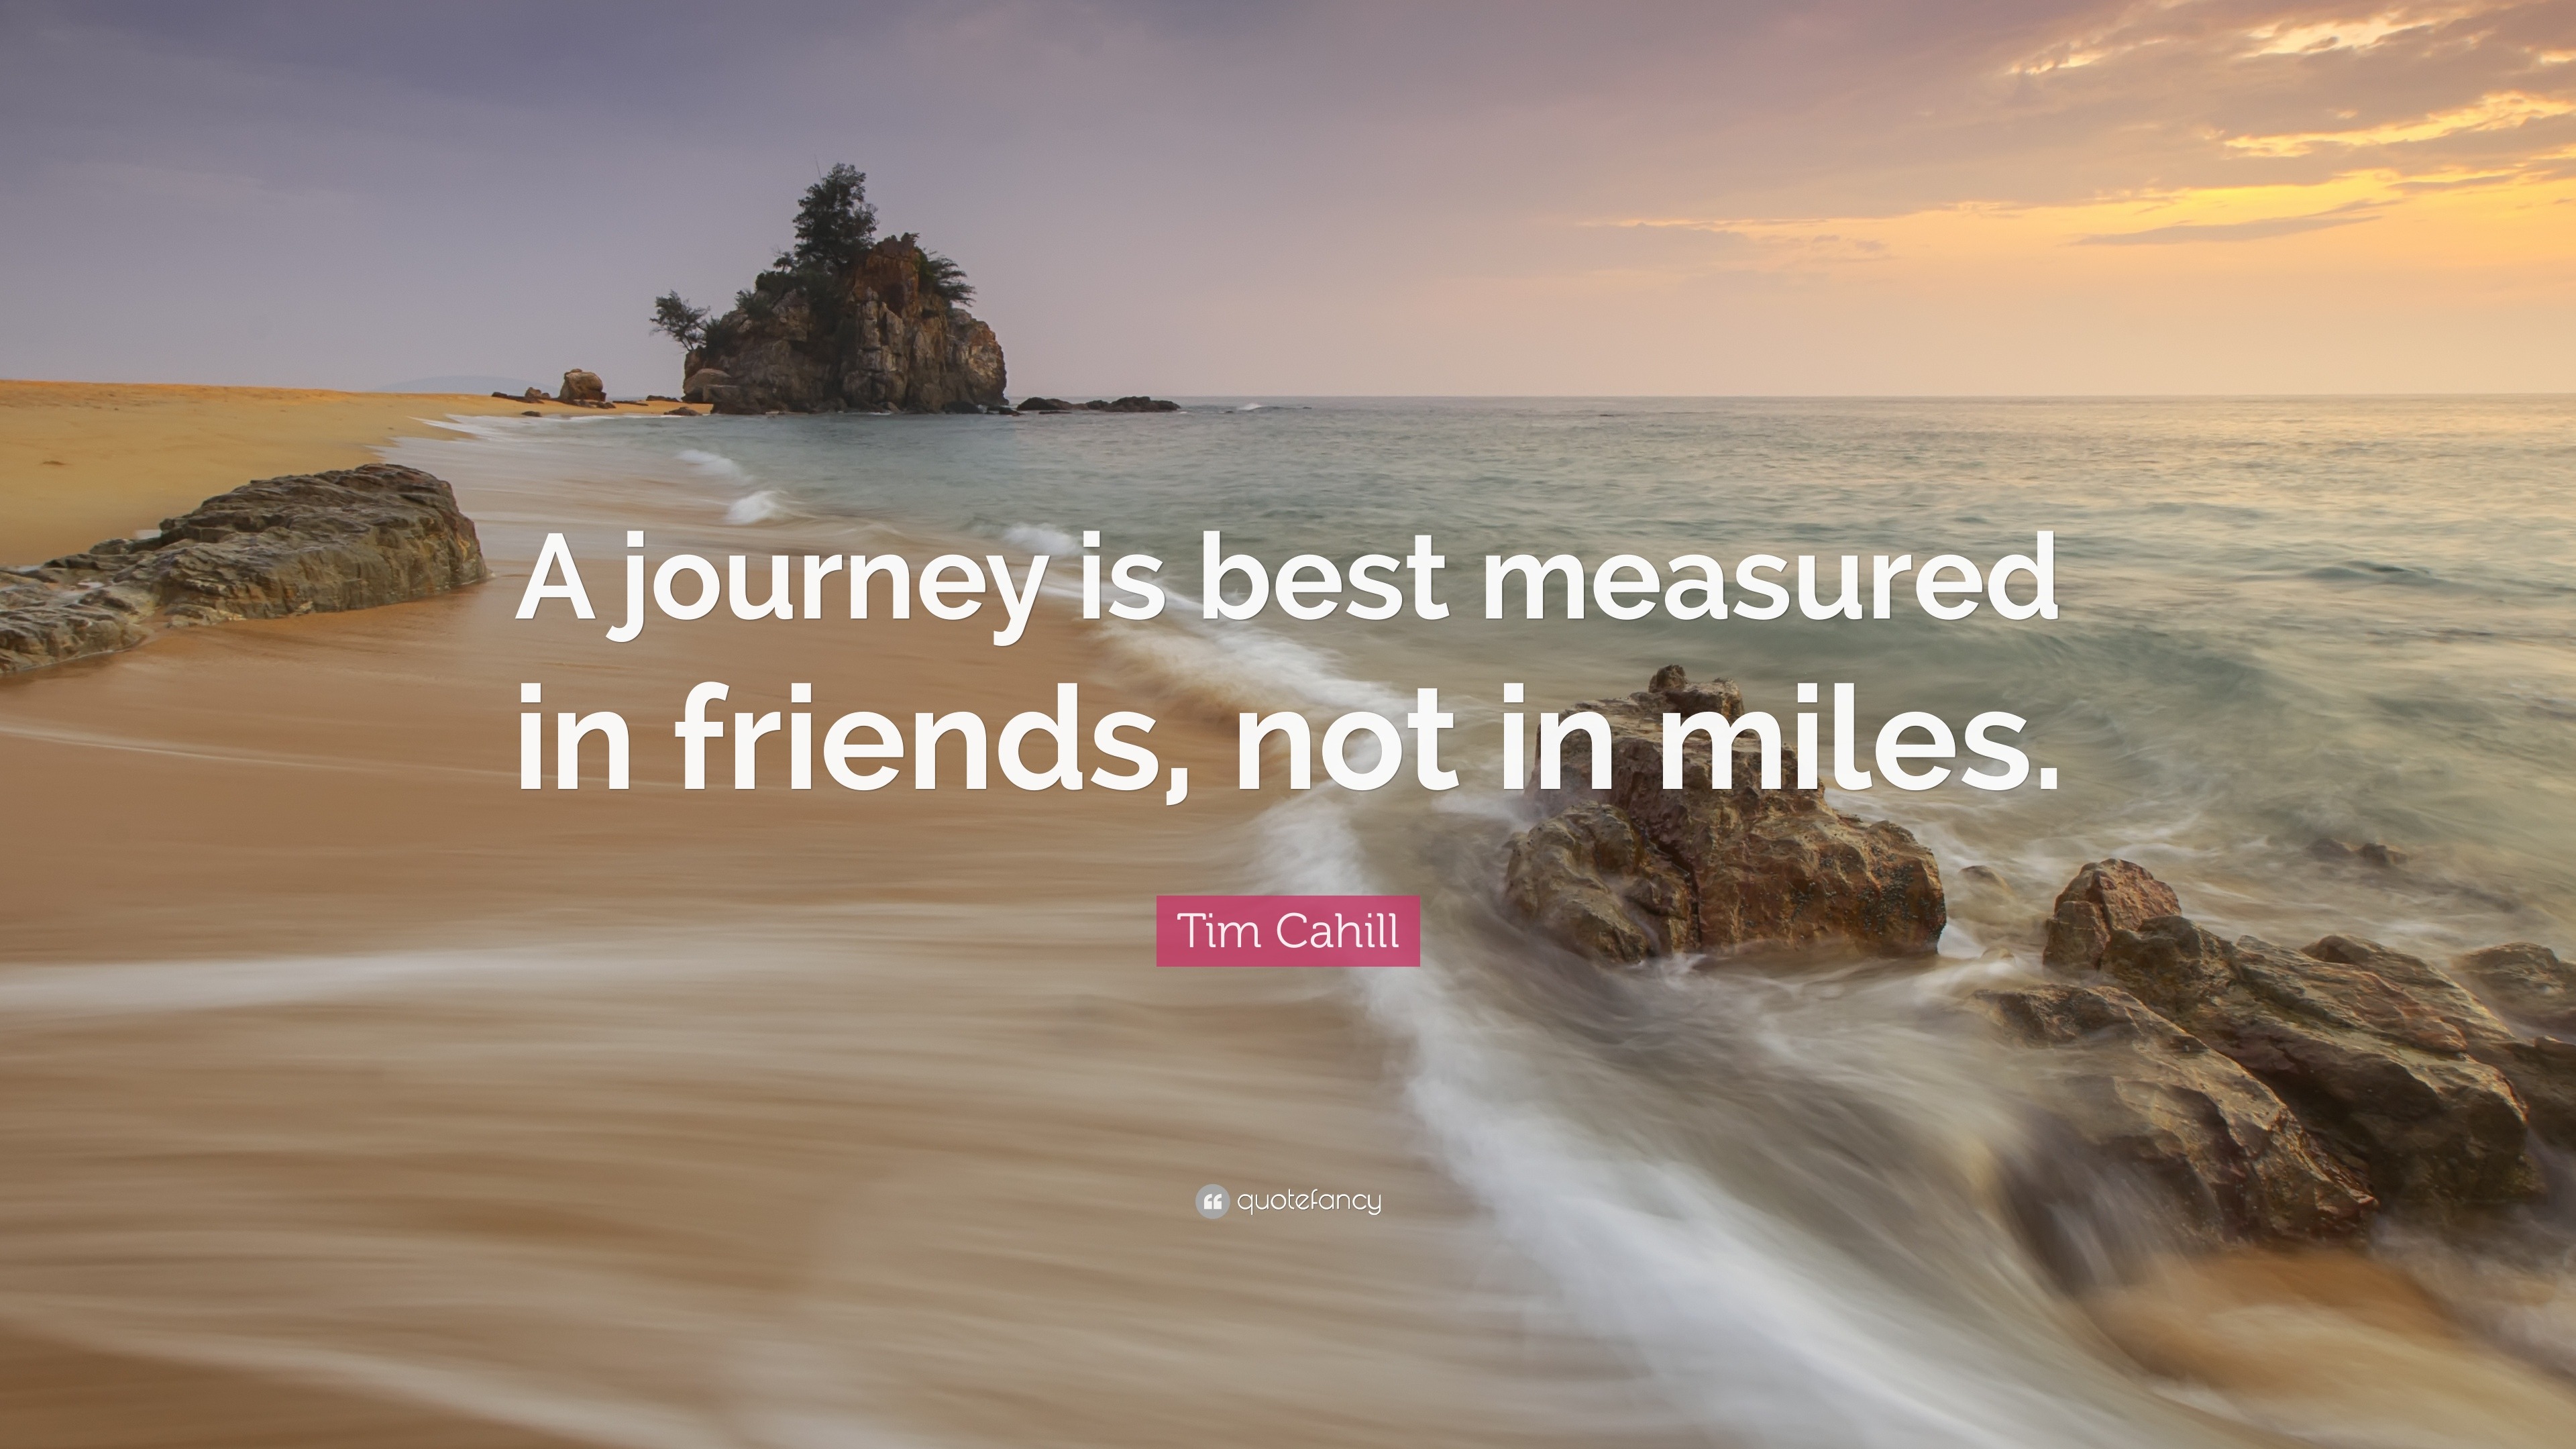 Tim Cahill Quote: “A journey is best measured in friends, not in miles.”